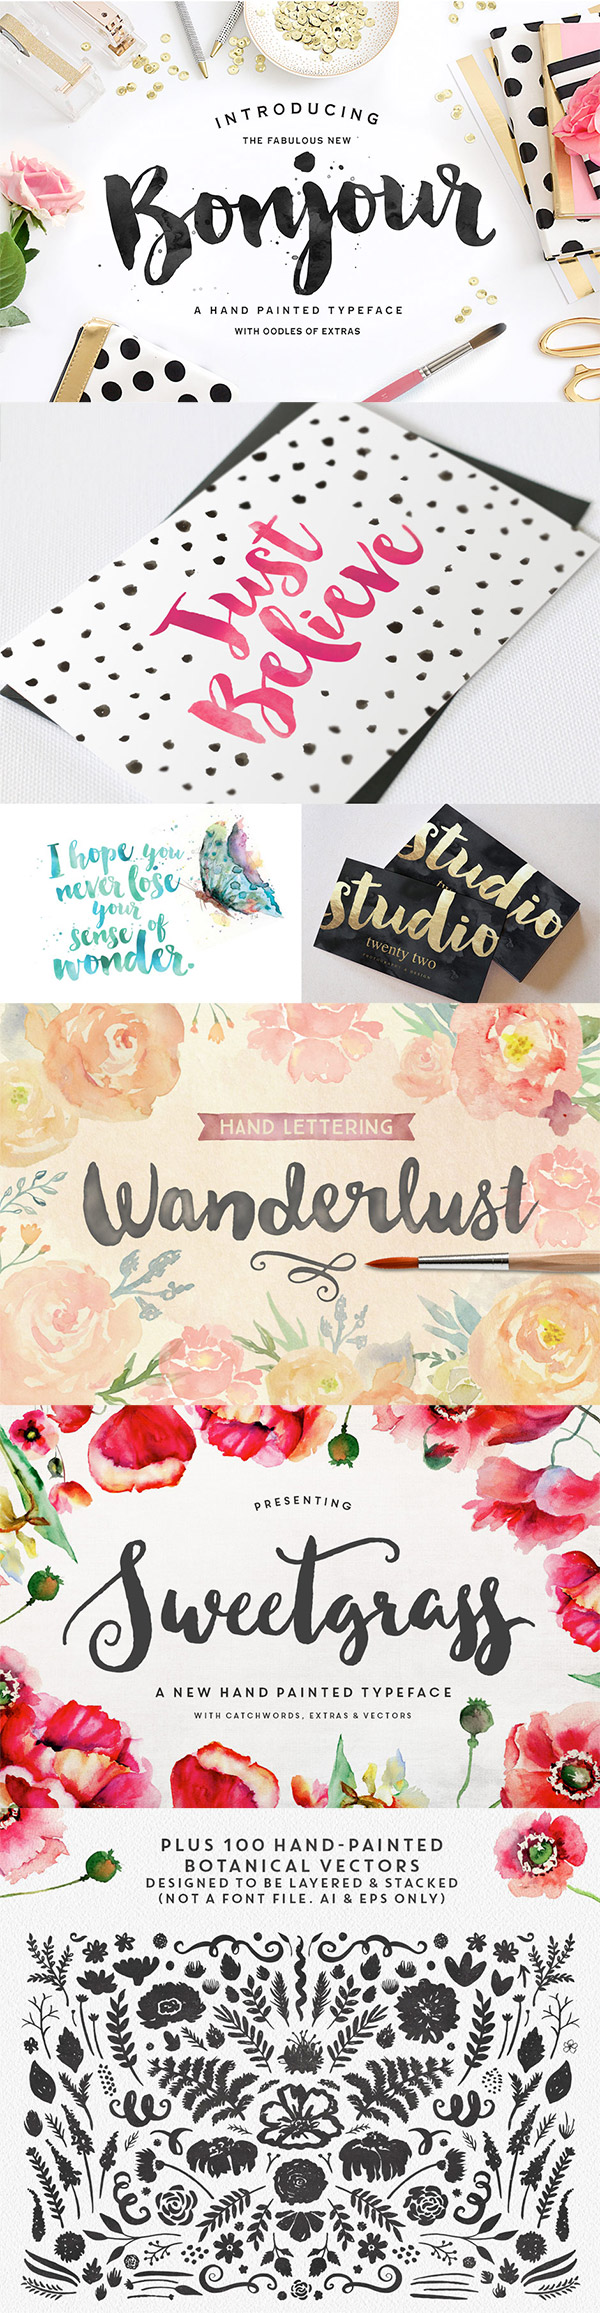 Hand Lettering resources